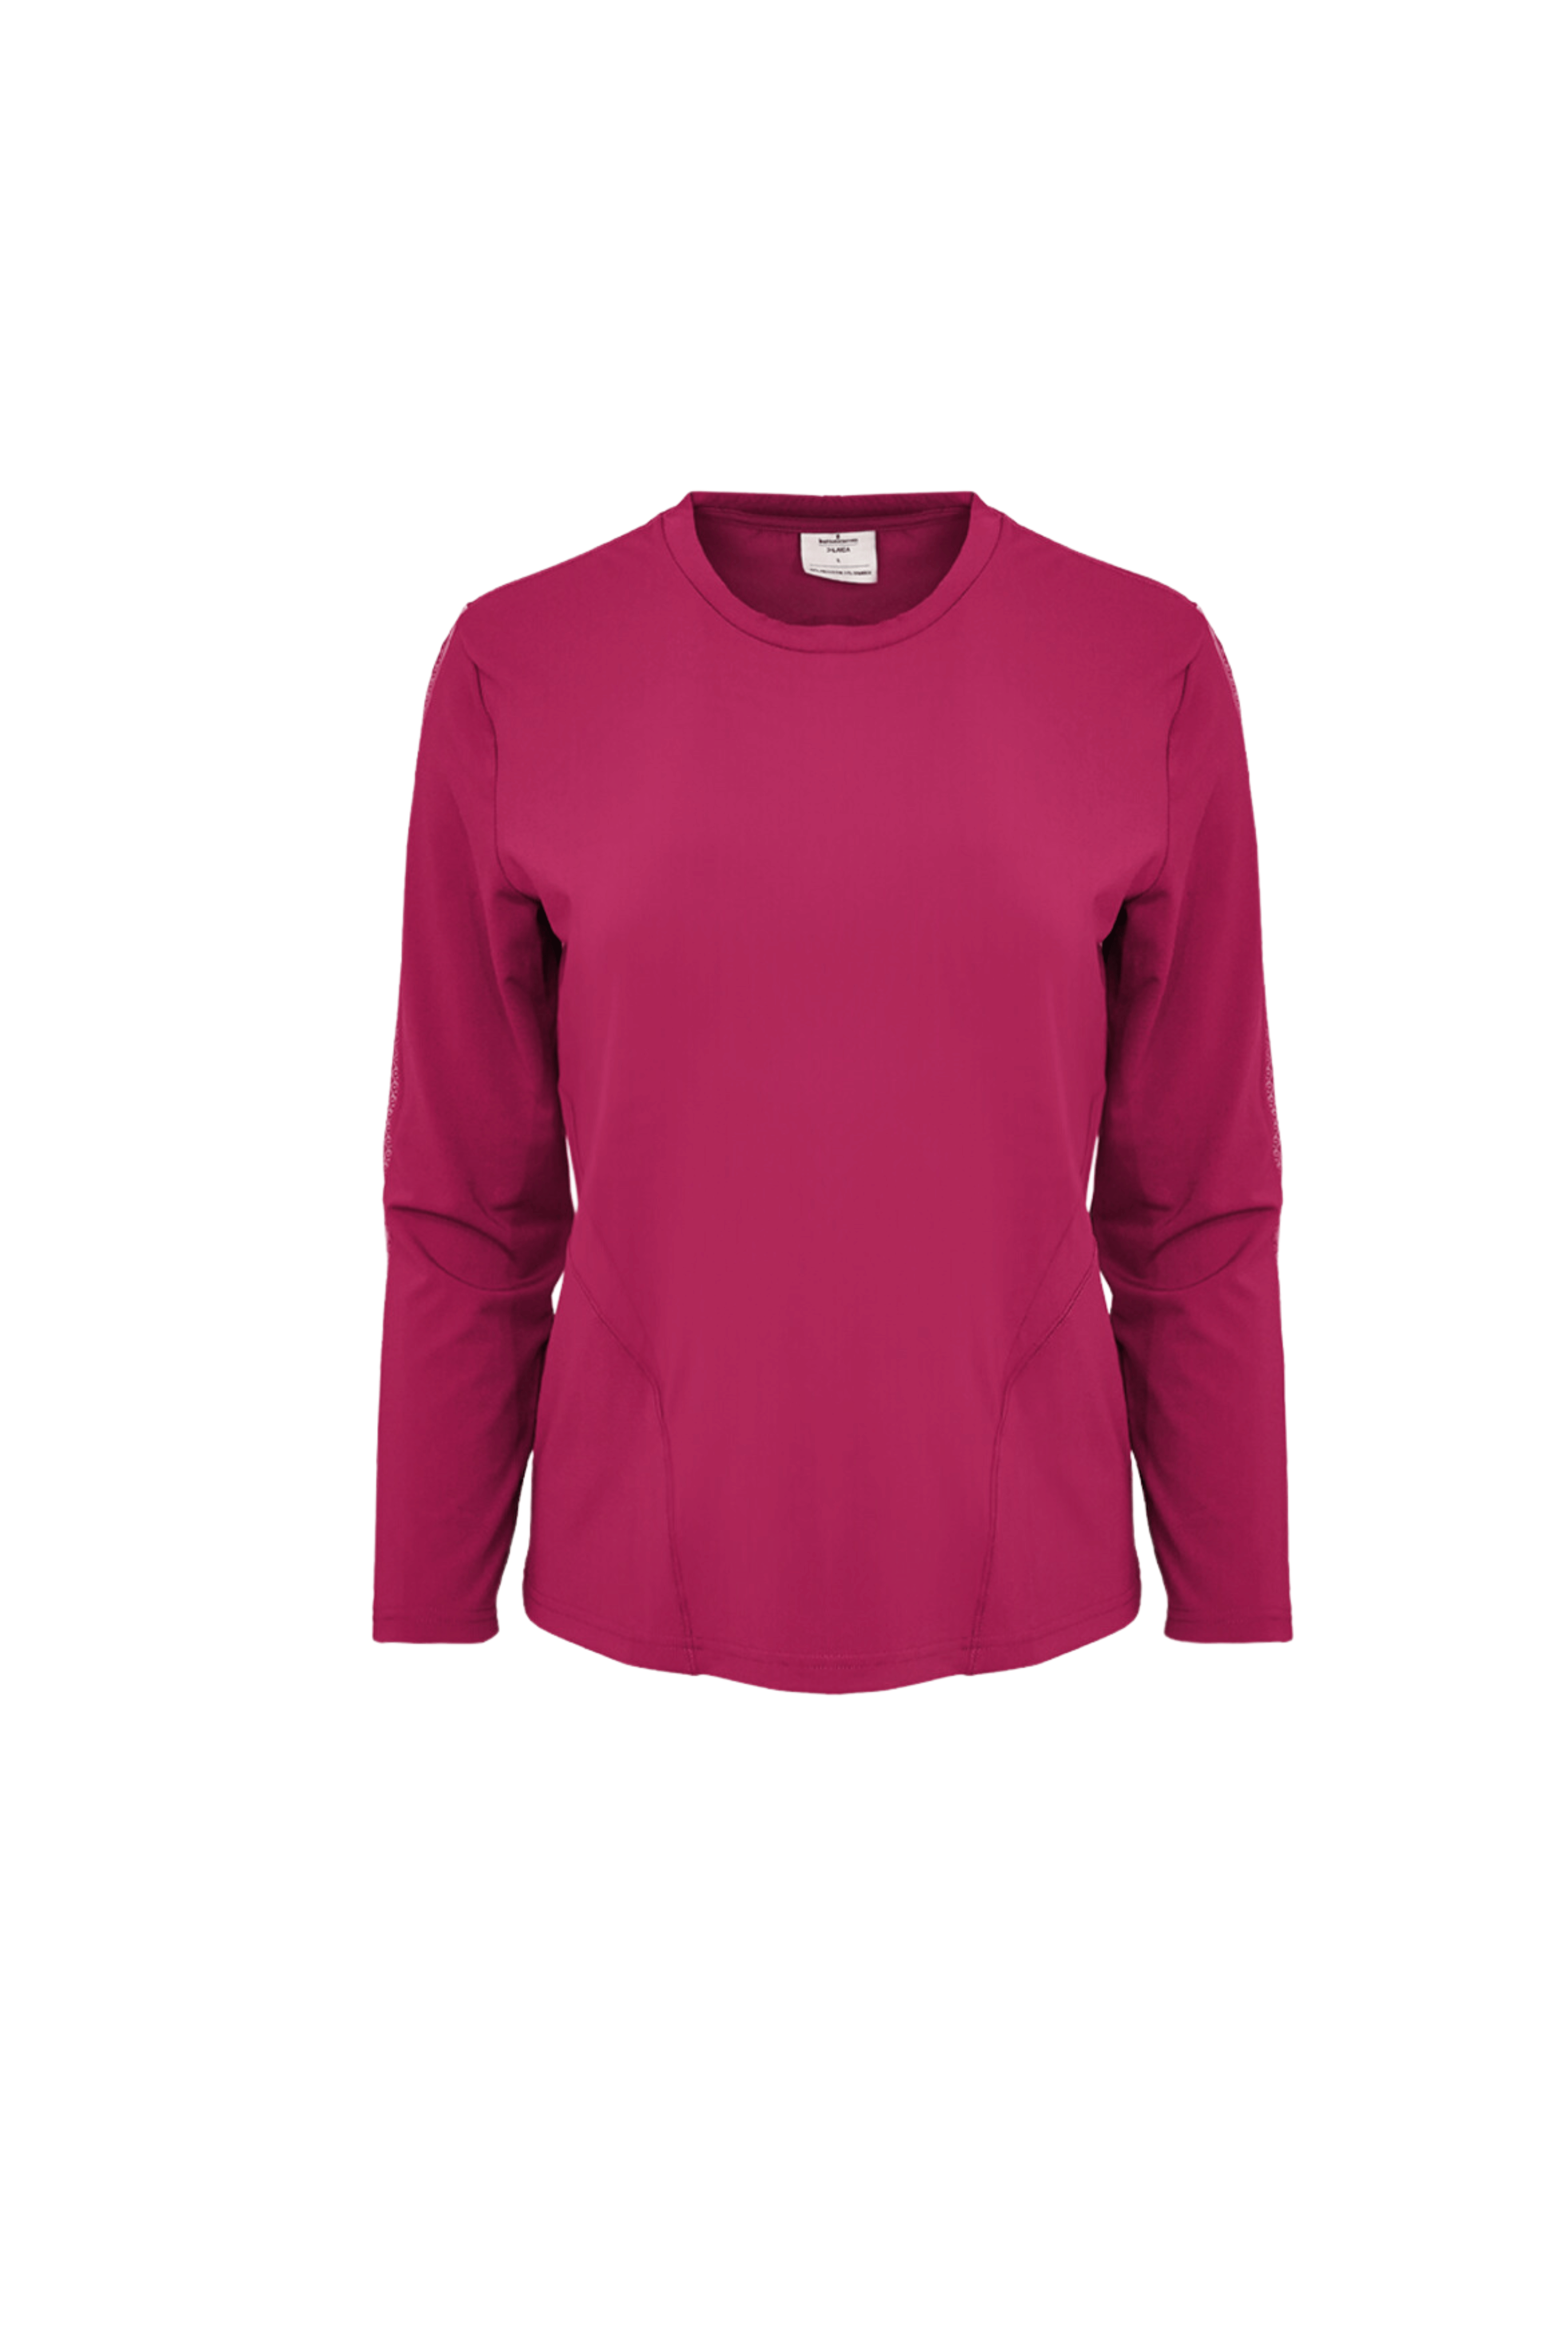 LAICA x Buttonscarves Athleisure Top - Magenta